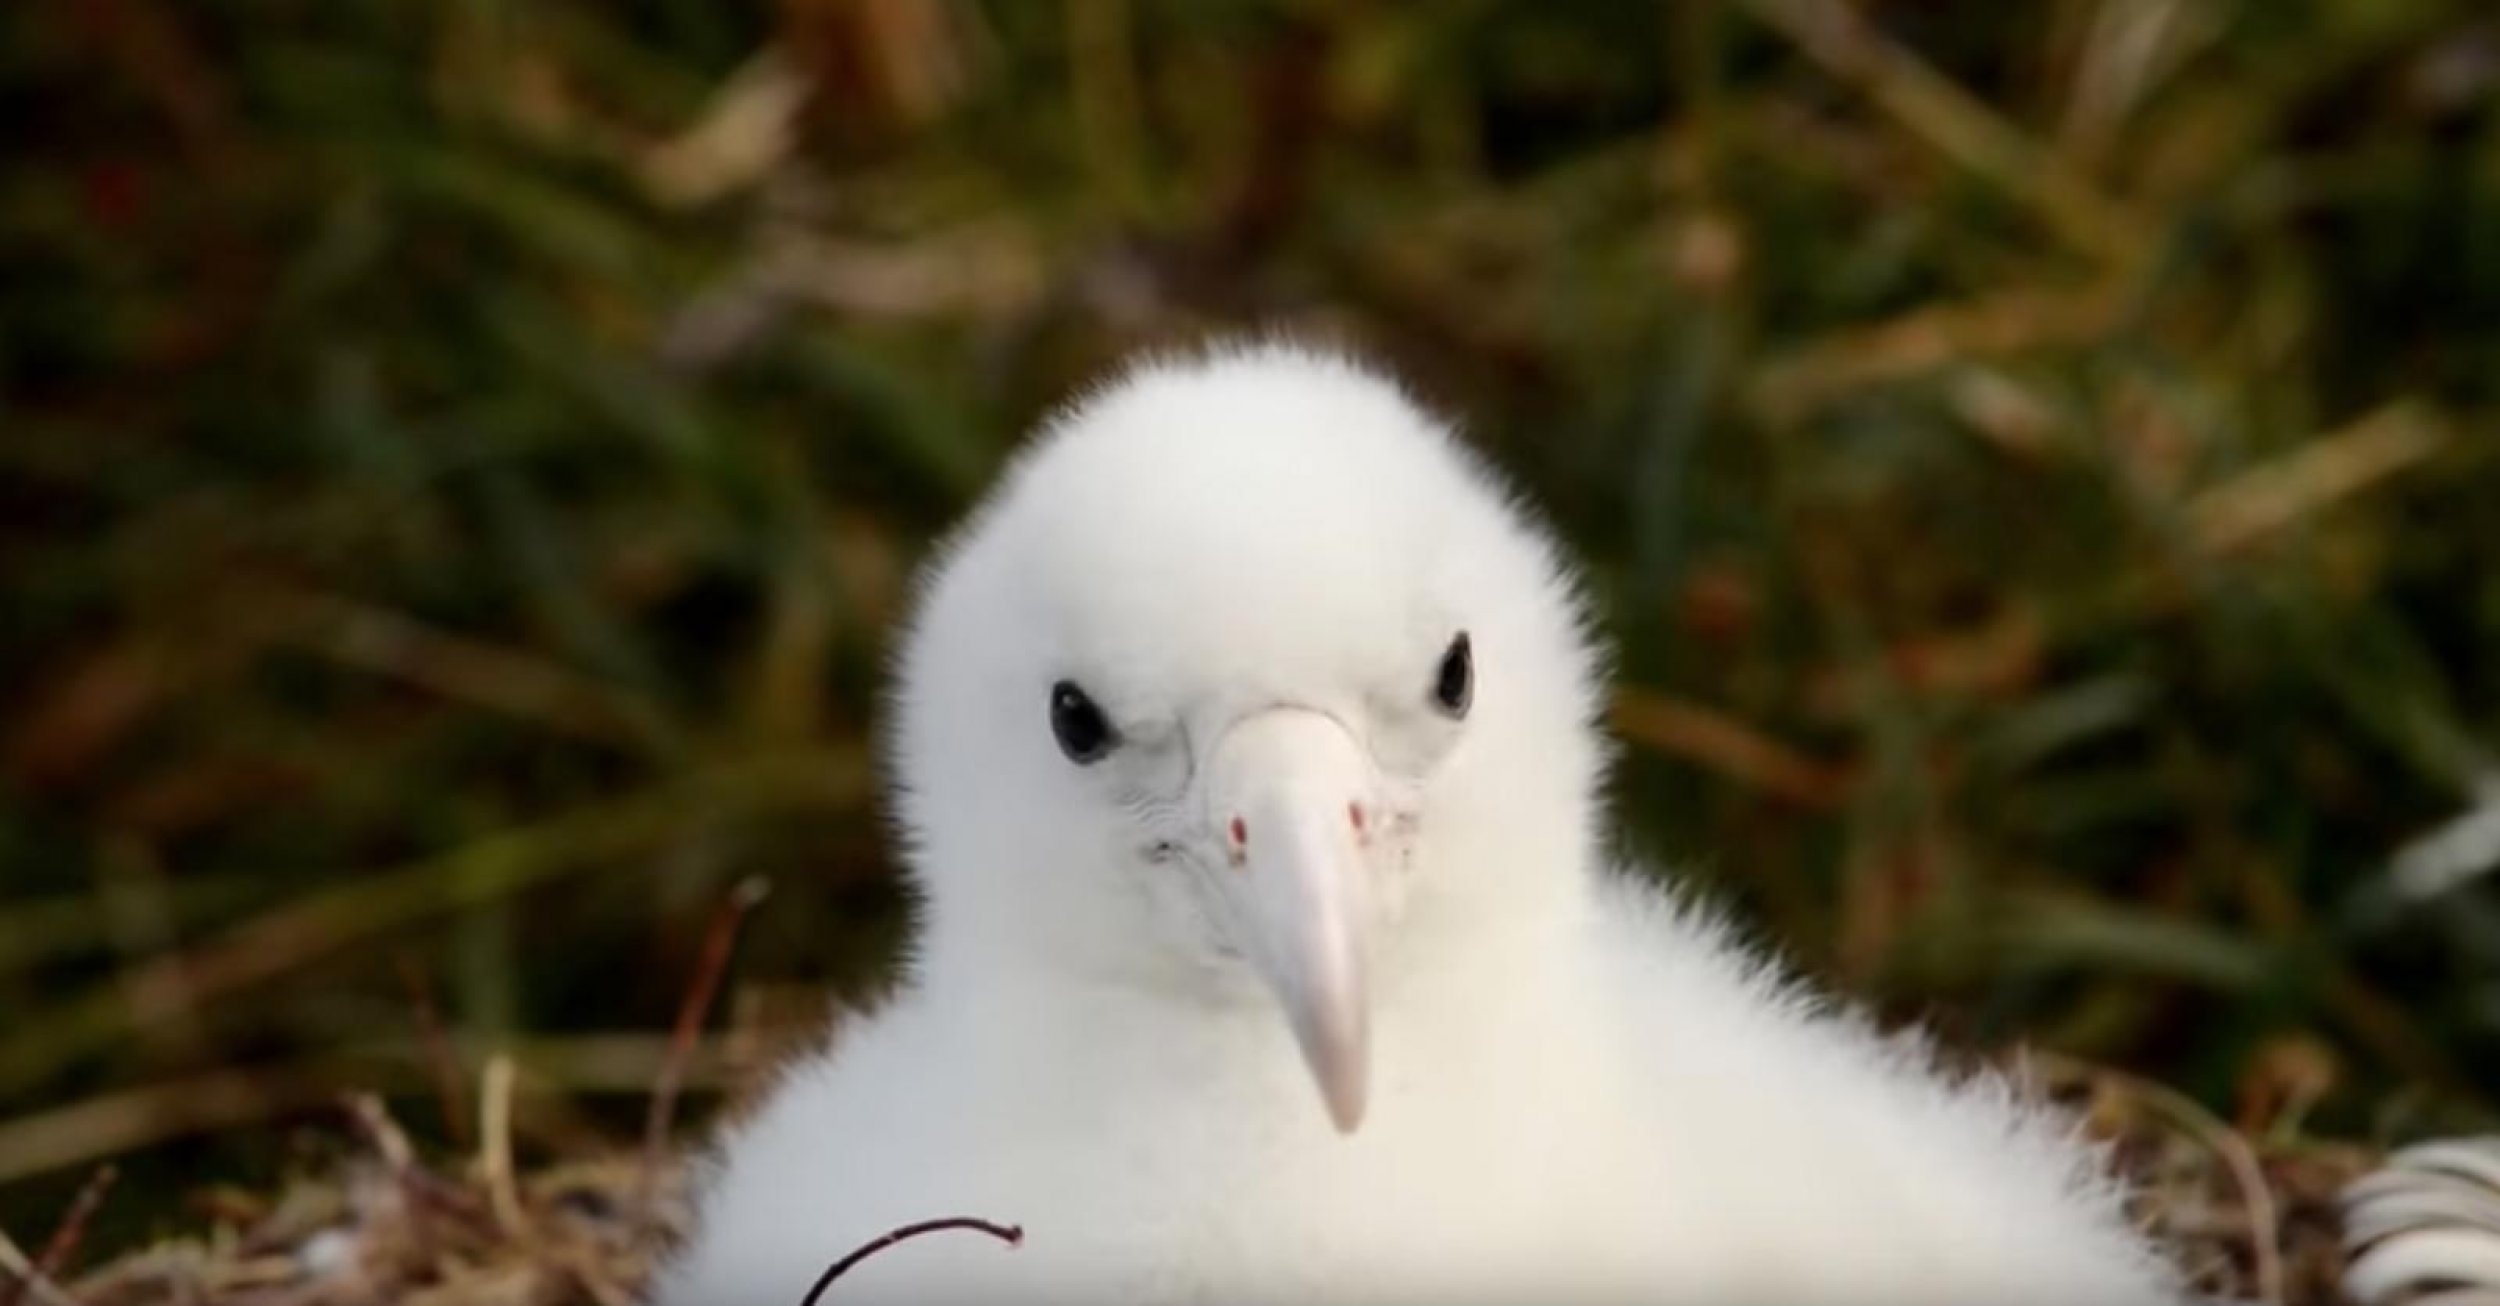 Monster Mice Are Eating Seabird Chicks Alive, Decimating Population